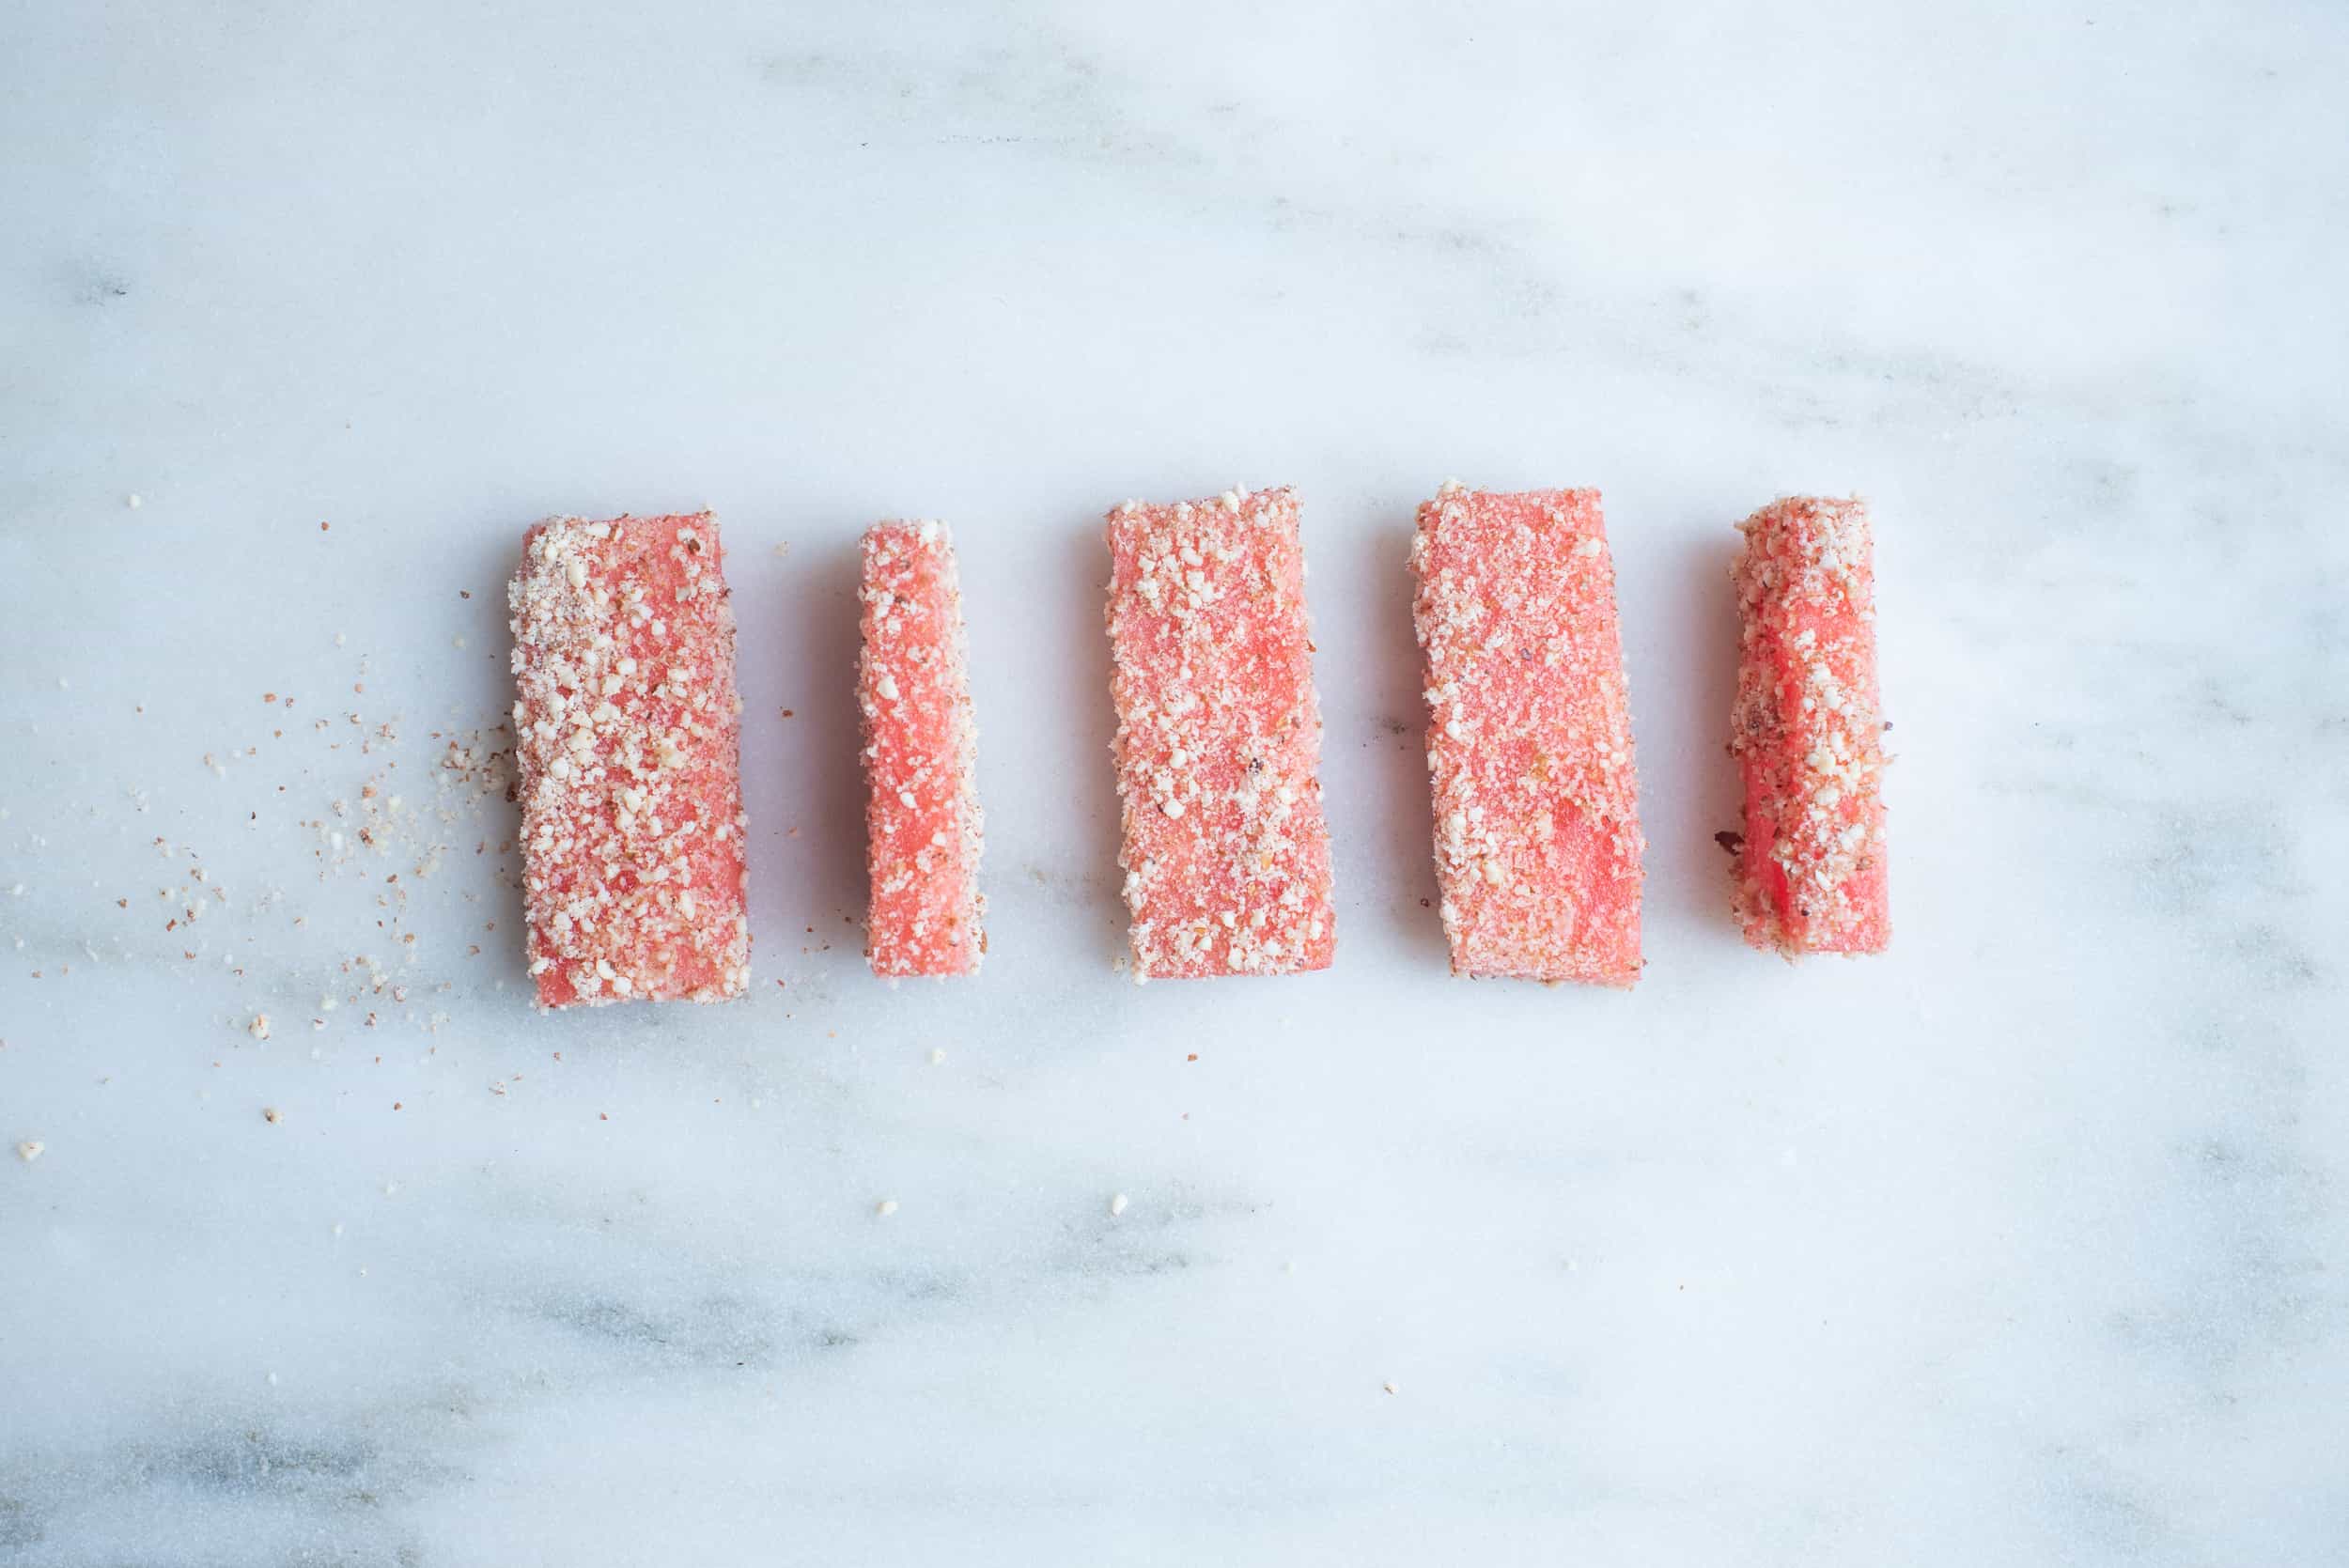 five thin rectangles of watermelon dusted with ground nut on a white background